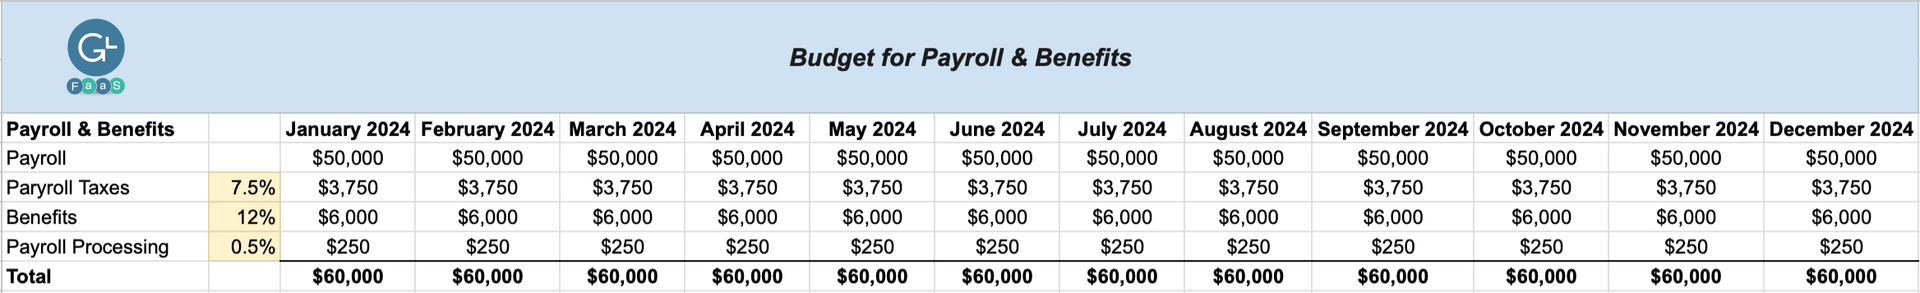 Excel sheet budget for employee benefits